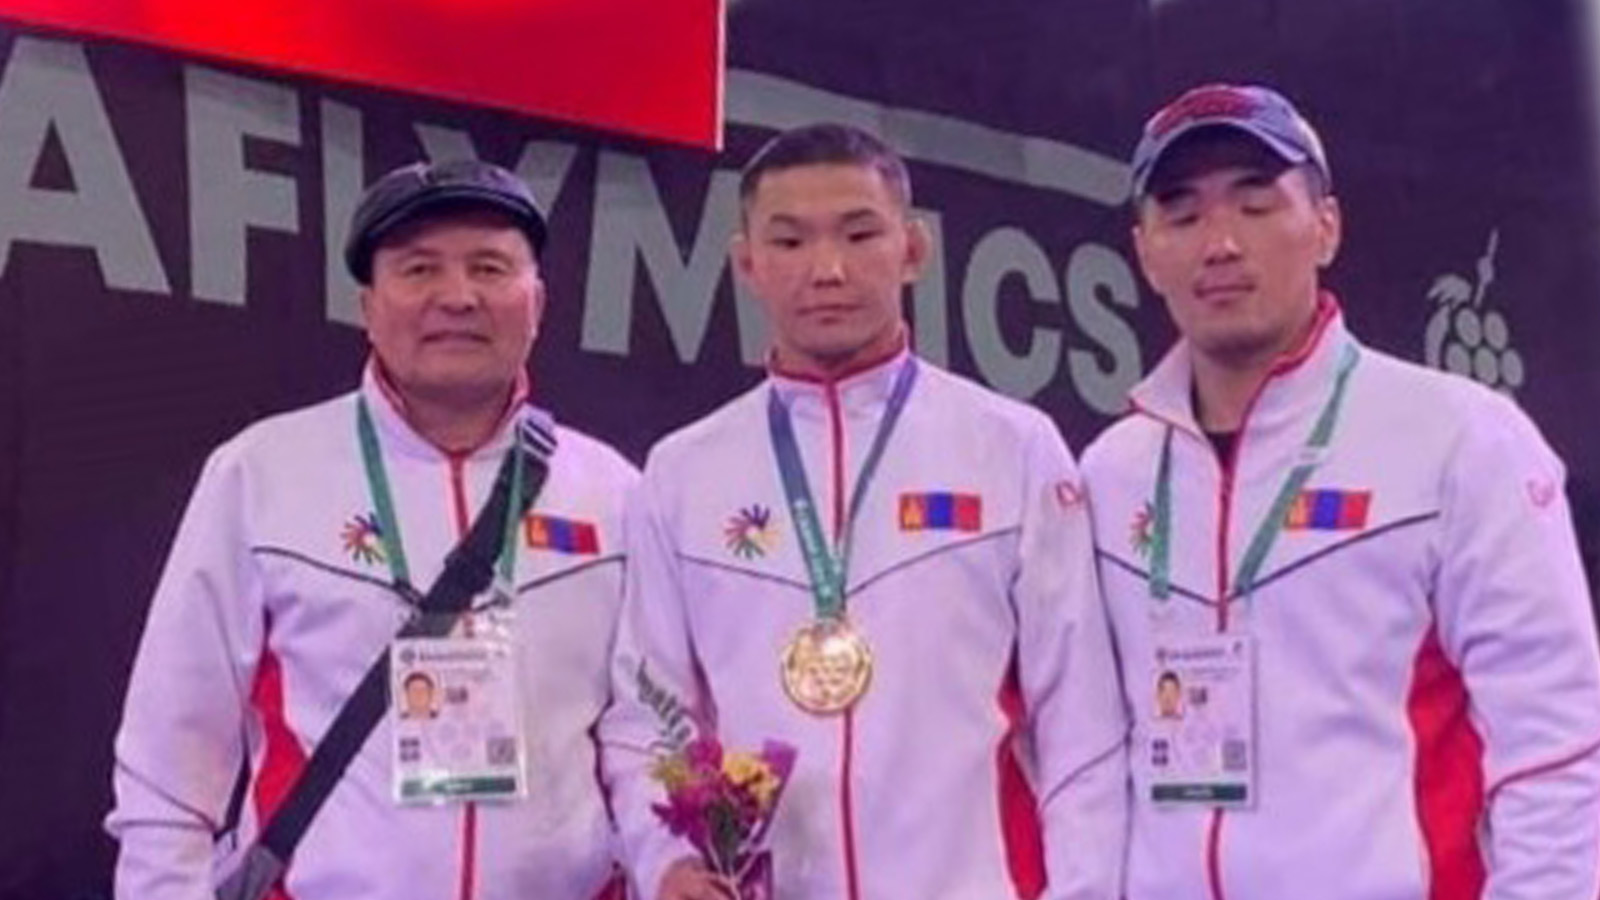 erkhembayar wins gold at deaflympics pictured with coaches and winners